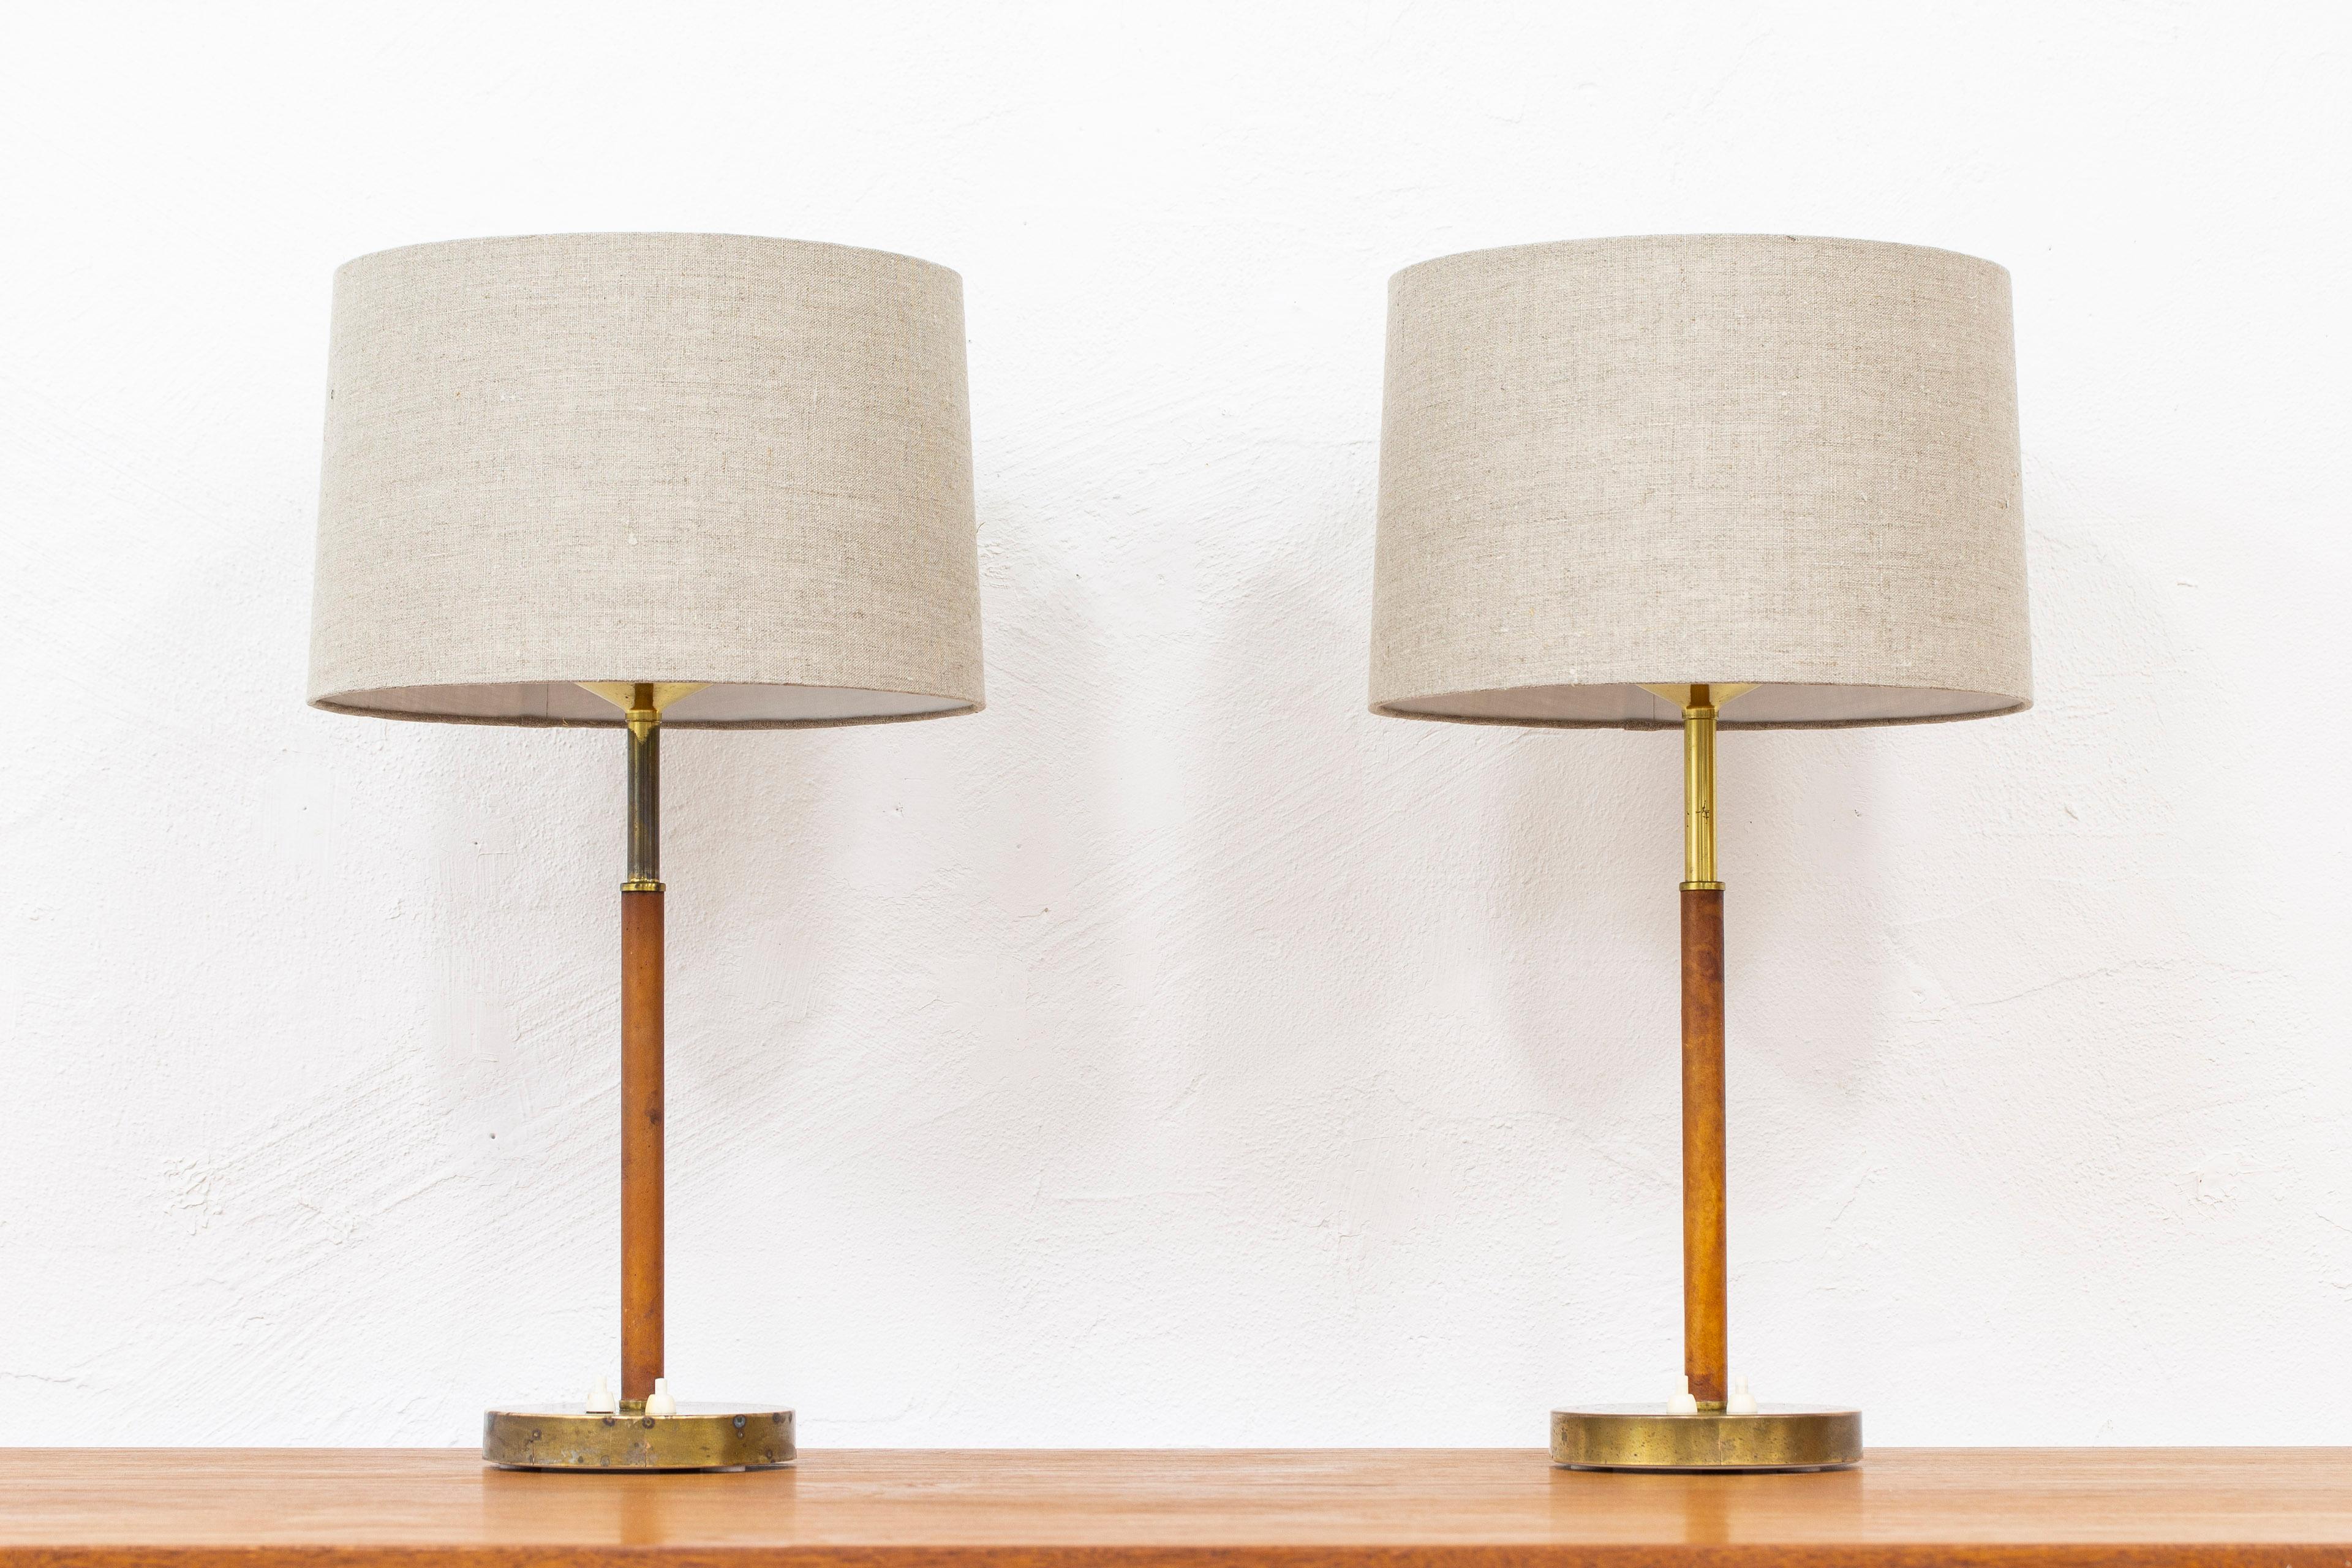 Scandinavian Modern Pair of Table Lamps in Brass and Original Leather by Bertil Brisborg, NK, Sweden